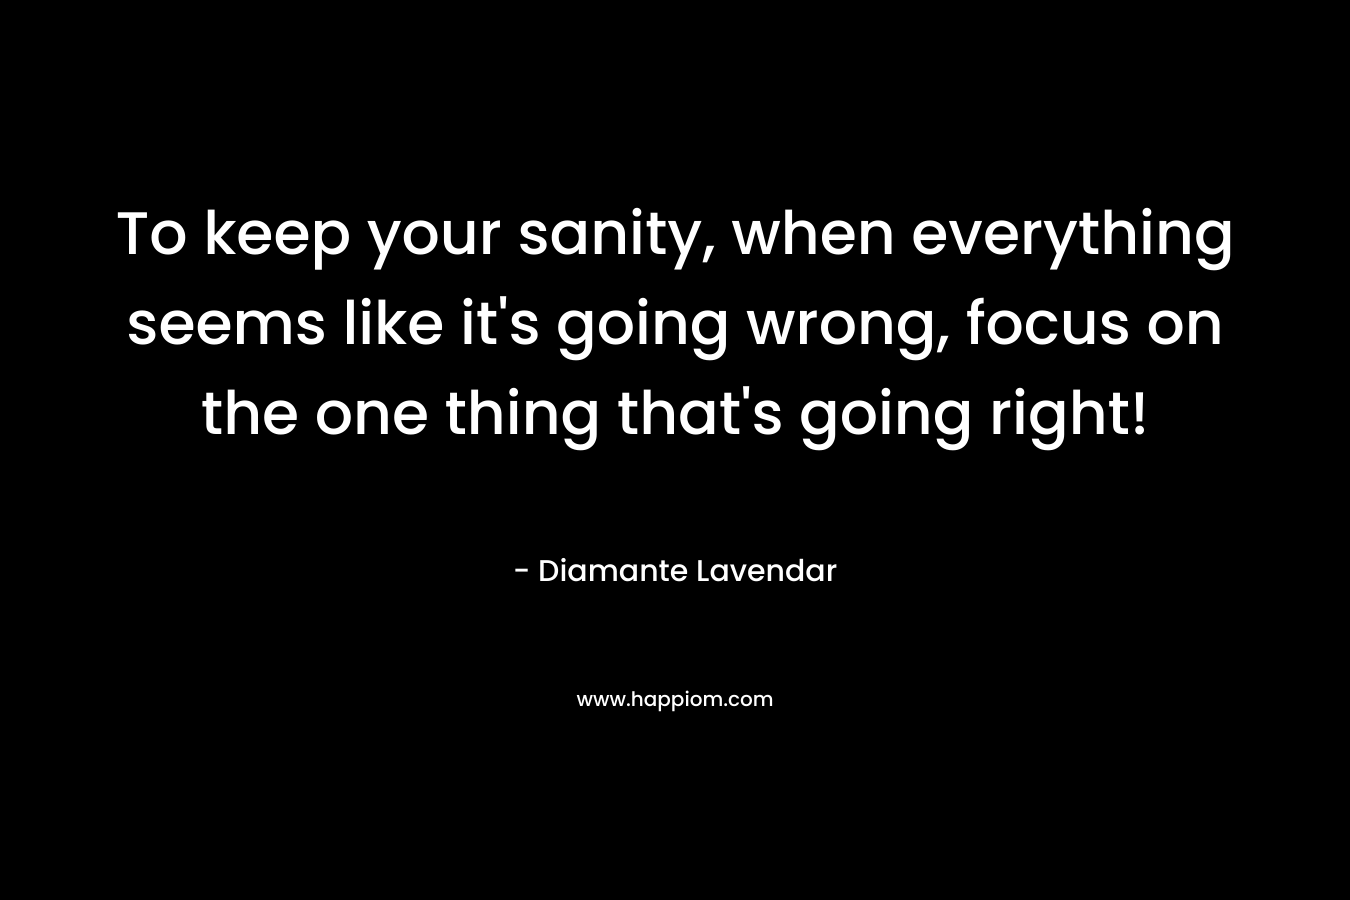 To keep your sanity, when everything seems like it’s going wrong, focus on the one thing that’s going right! – Diamante Lavendar